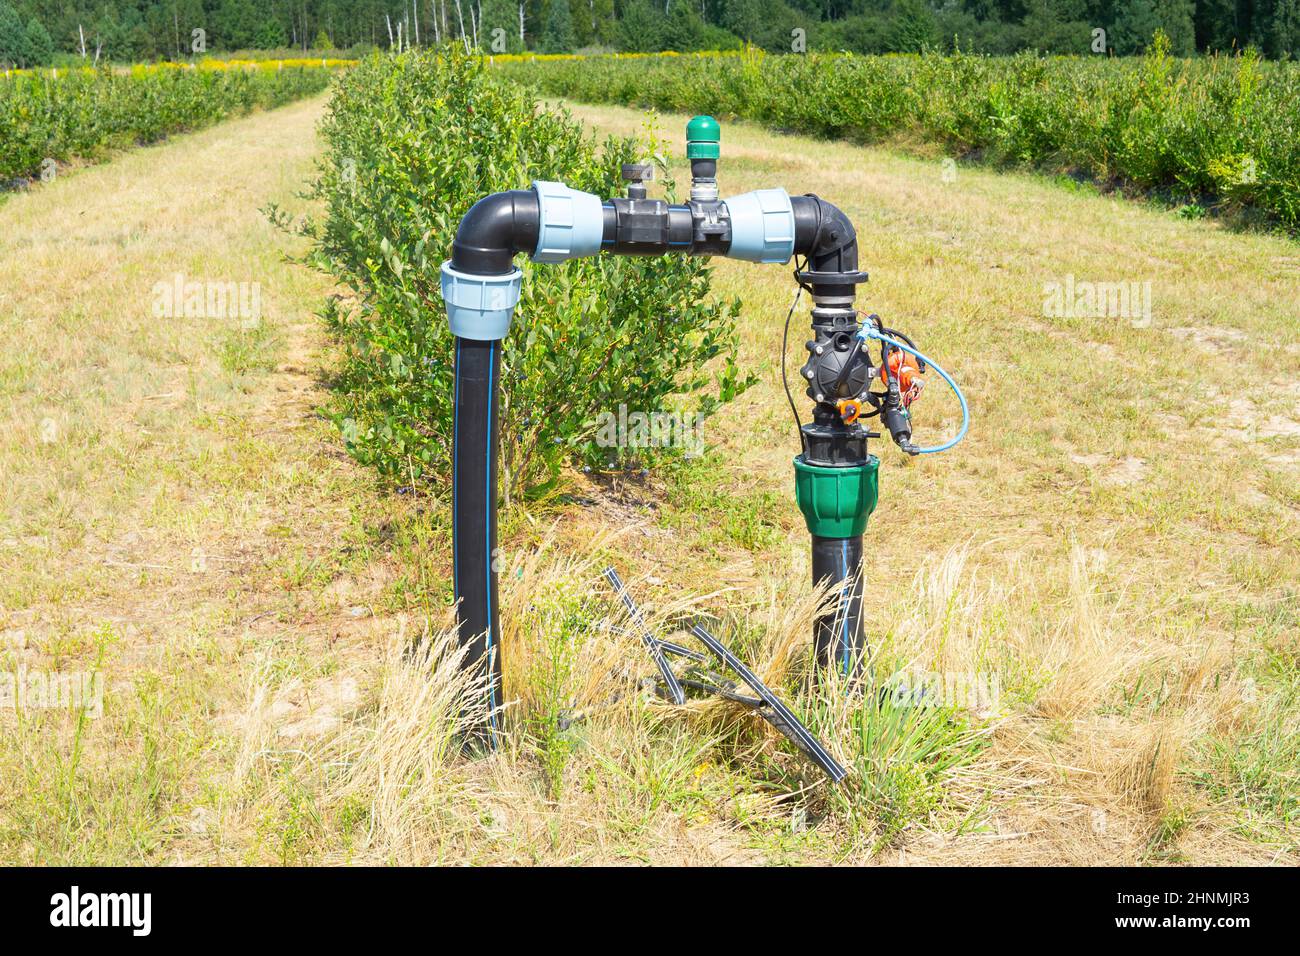 Part of the blueberries farm drip irrigation system. Stock Photo